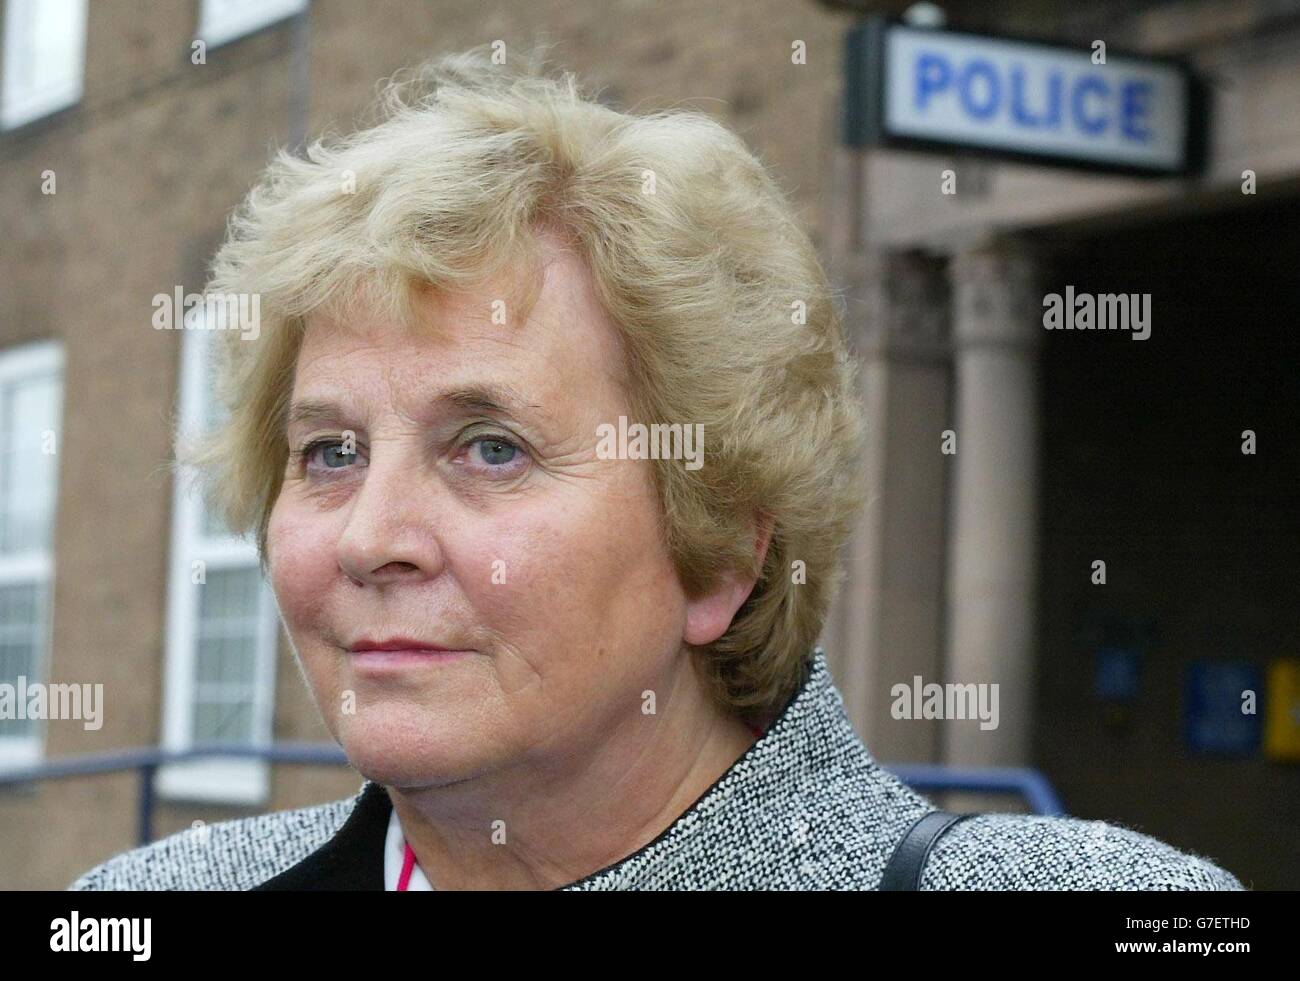 A woman who survived a suicide pact in which her husband died insisted she was ``totally innocent' today. Wendy Ainscow took an overdose of anti-depressants with her husband Bill before wading into the sea off Tenerife earlier this month. Pictured here; Wendy Ainscow leaves Bromborough police station, Wirral, after being questioned by police after her husband died in a suicide pact that she survived. Stock Photo